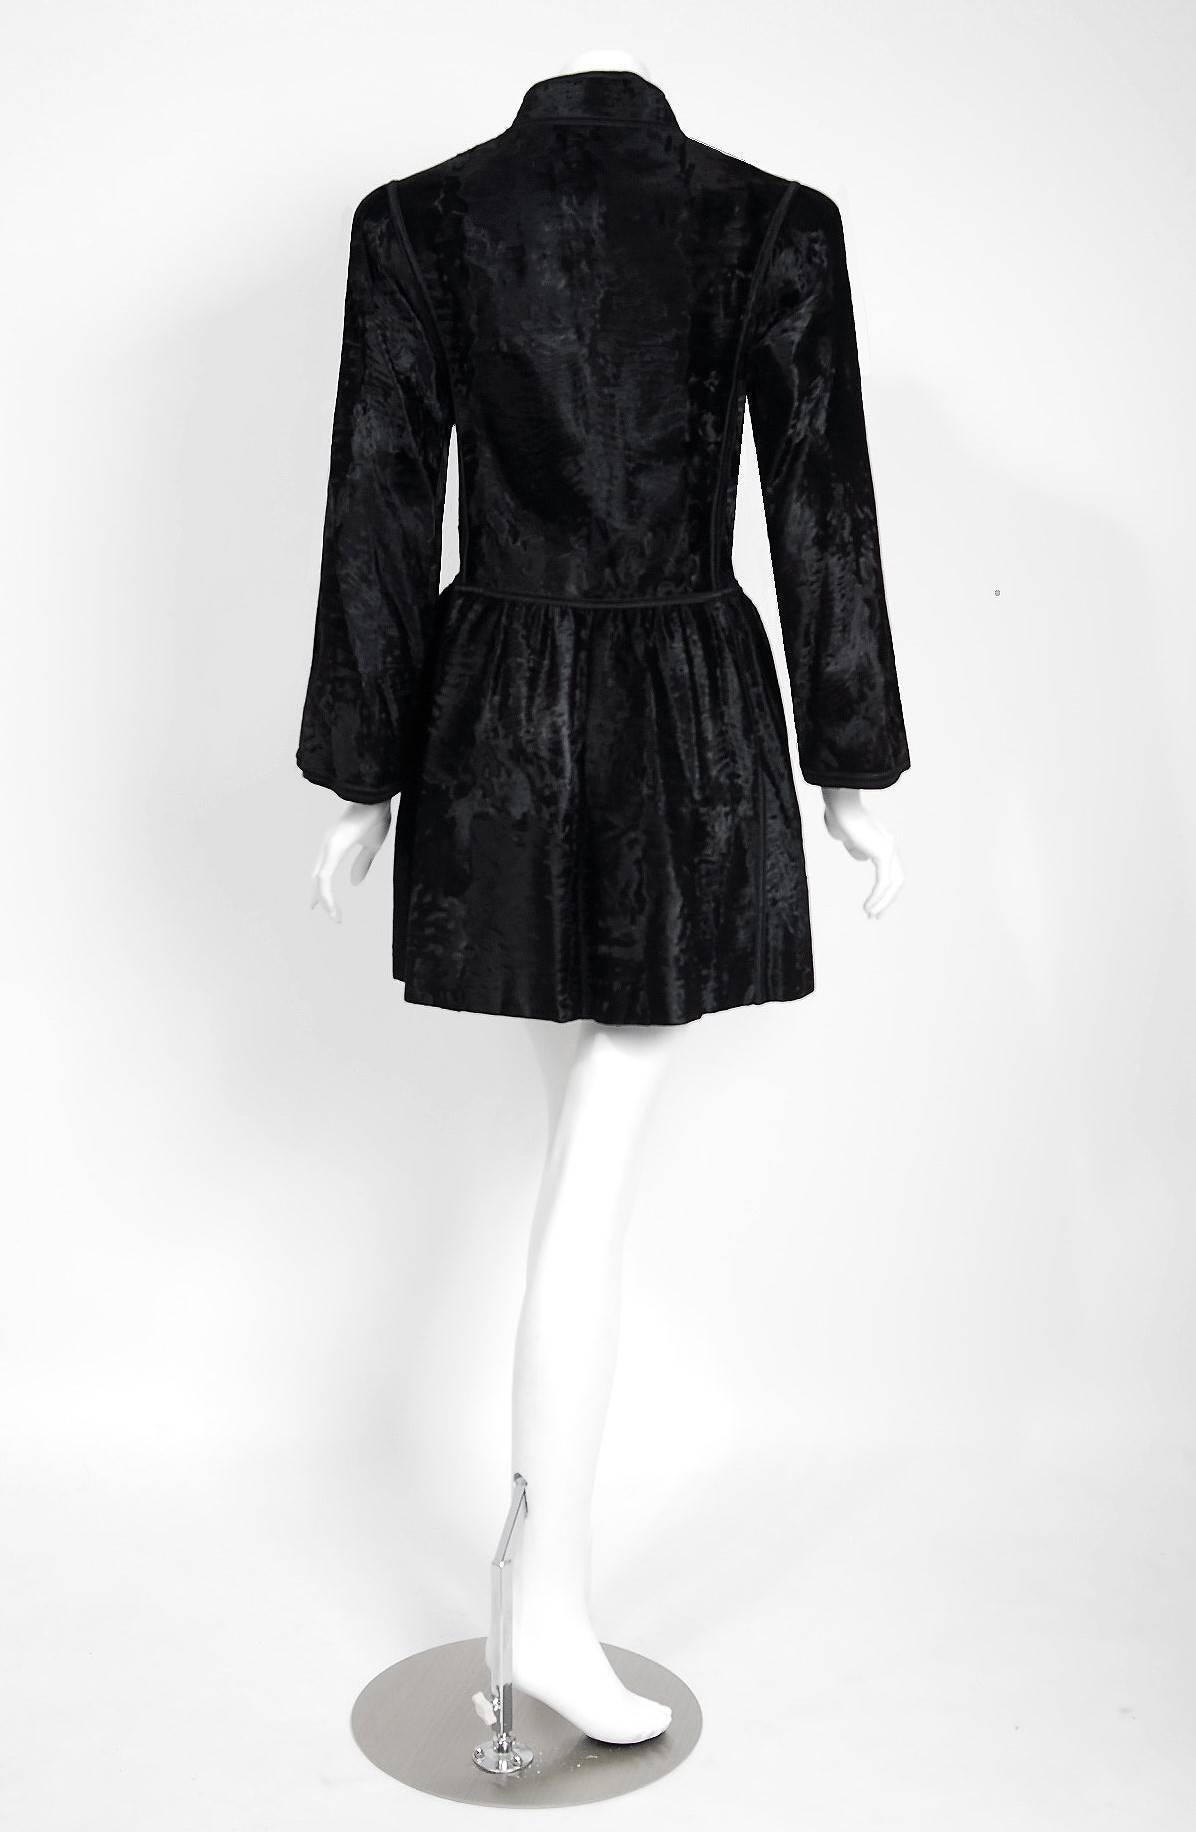 1976 Yves Saint Laurent Couture Russian Collection Black Broadtail Fur Jacket 2